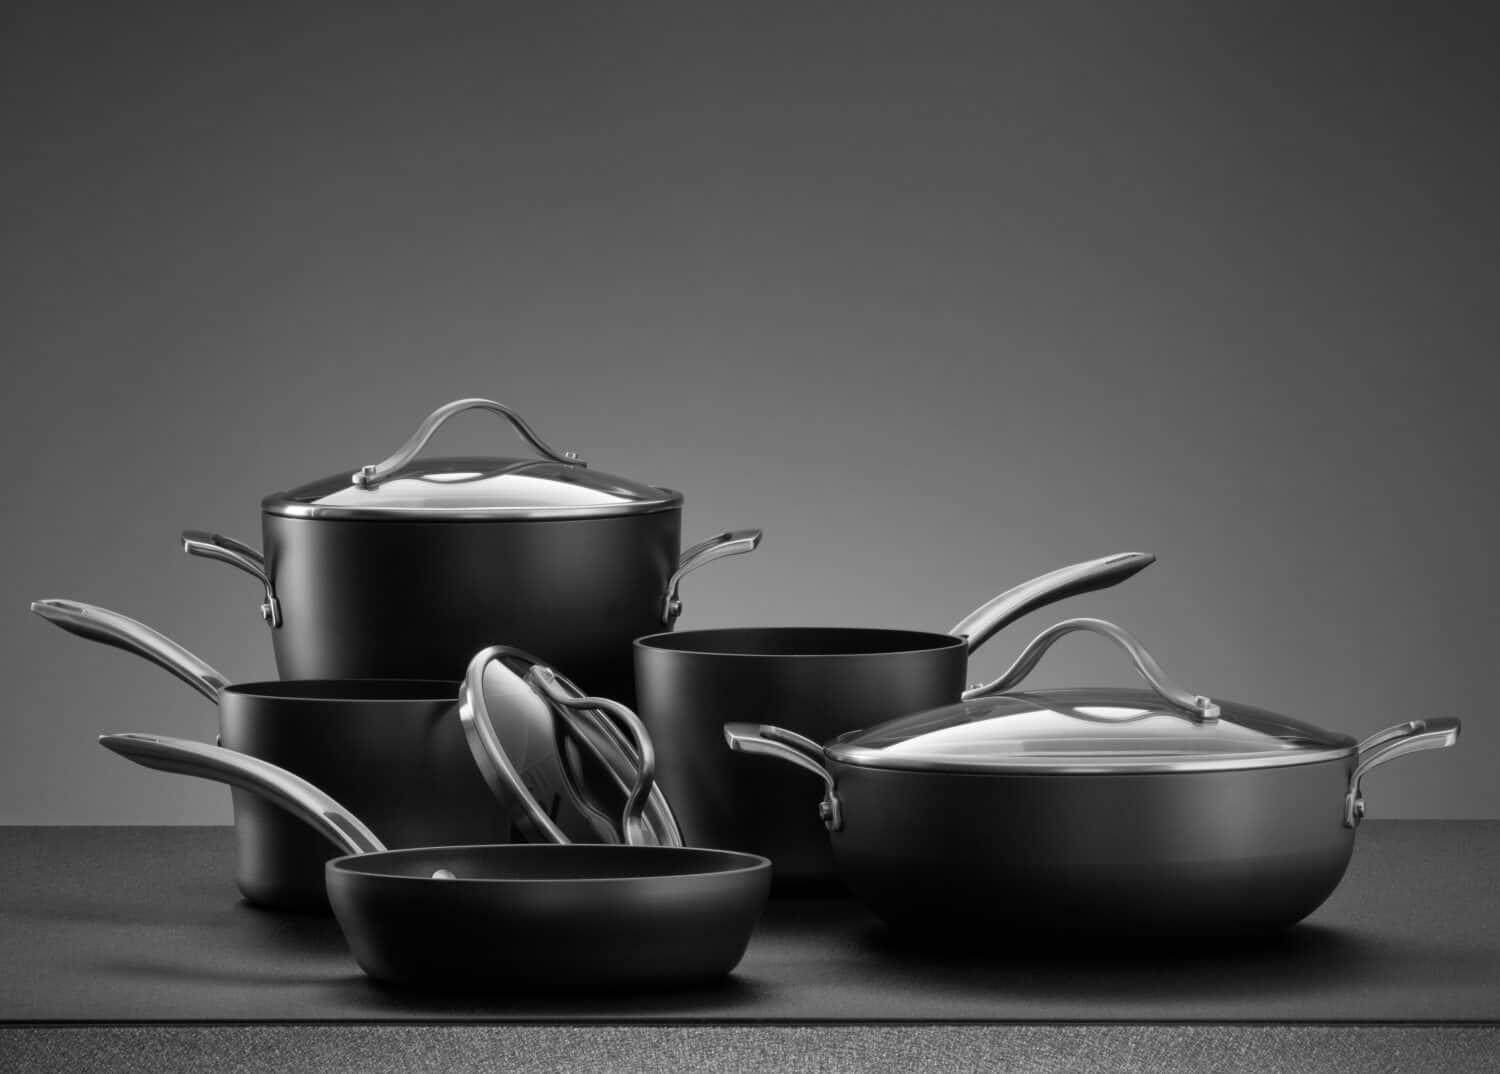 Porcelain Enamel Cookware - Definition and Cooking Information 